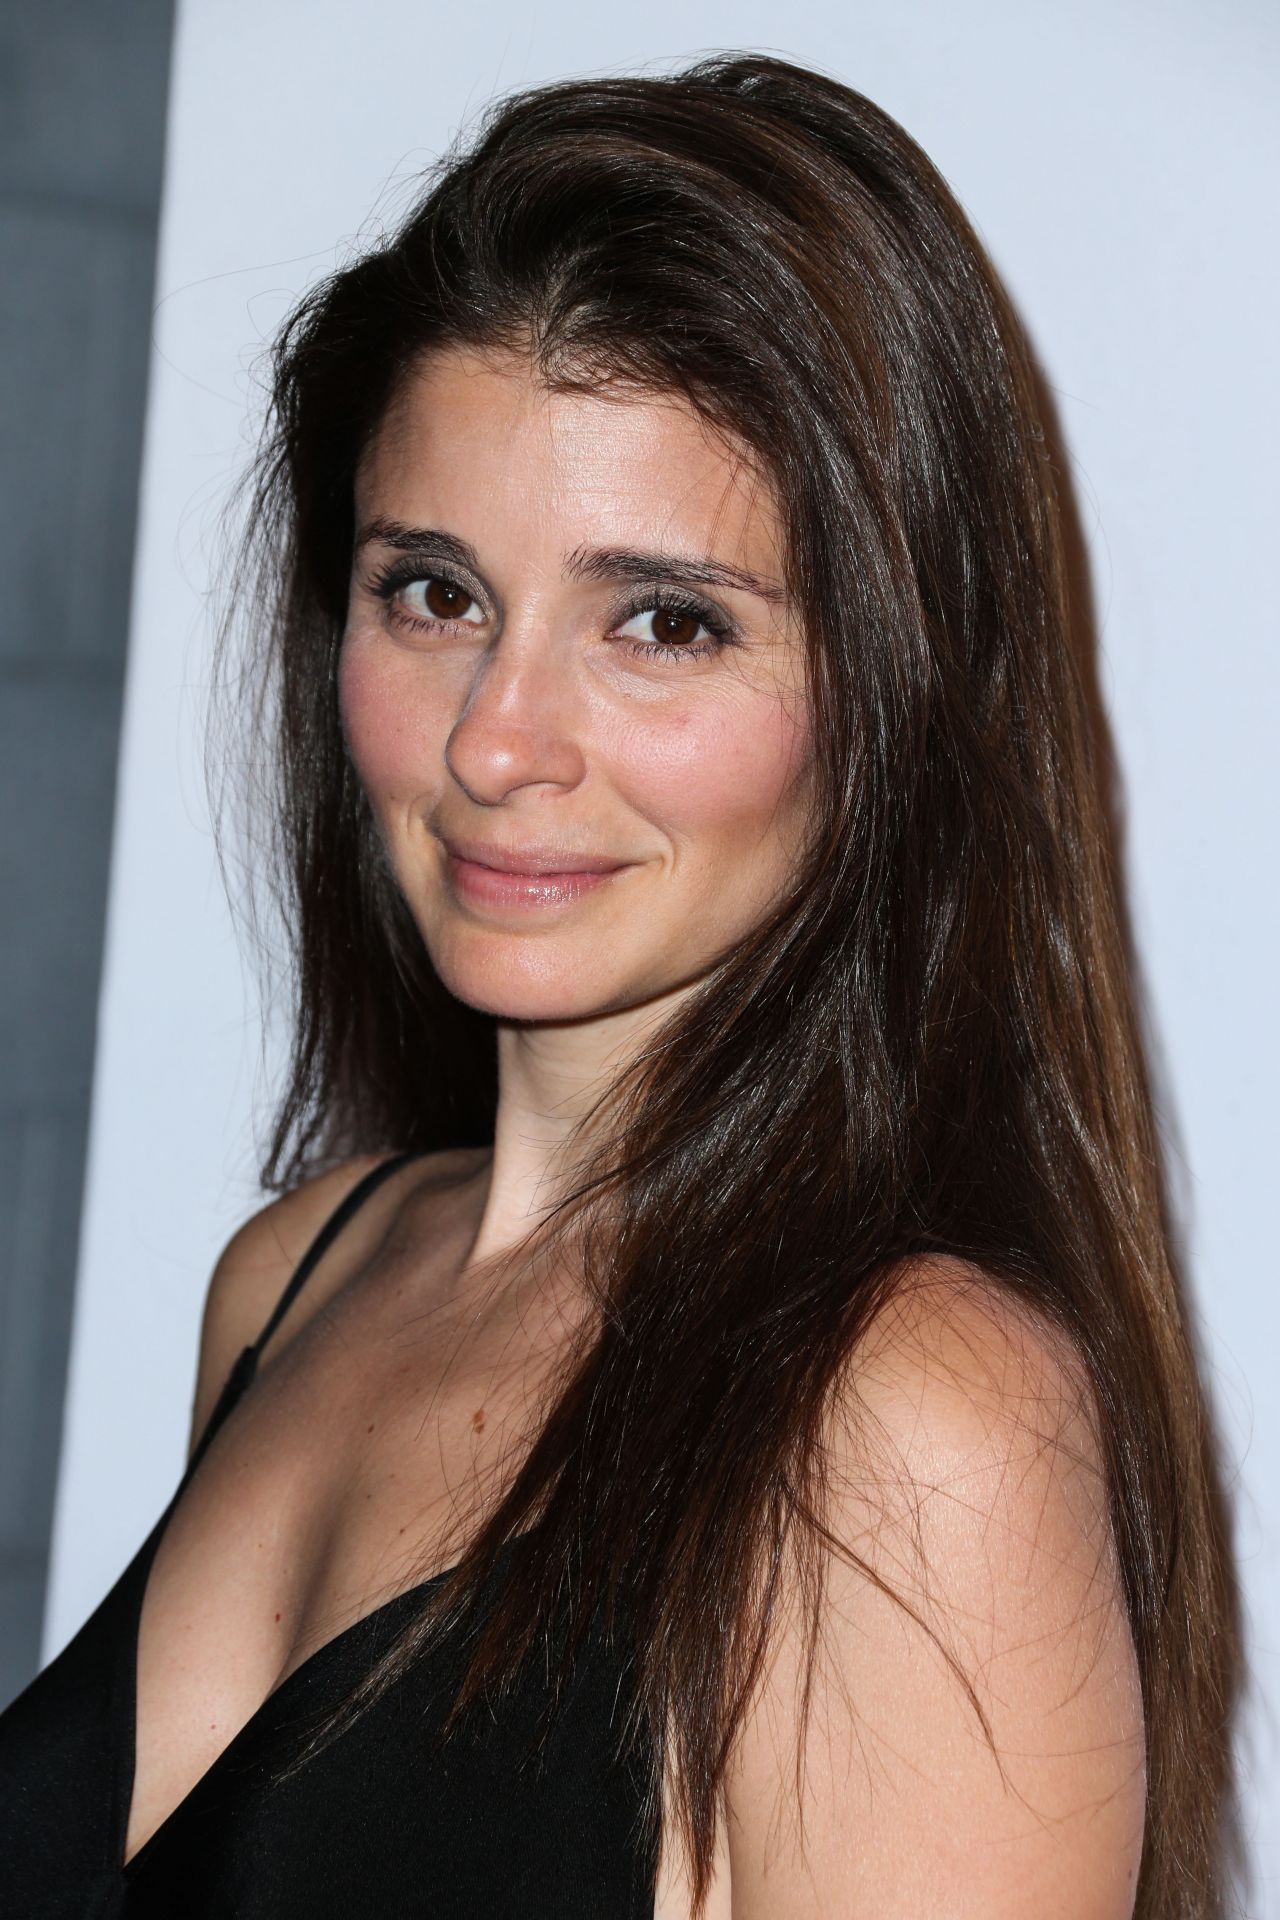 Amazing Shiri Appleby Pictures & Backgrounds